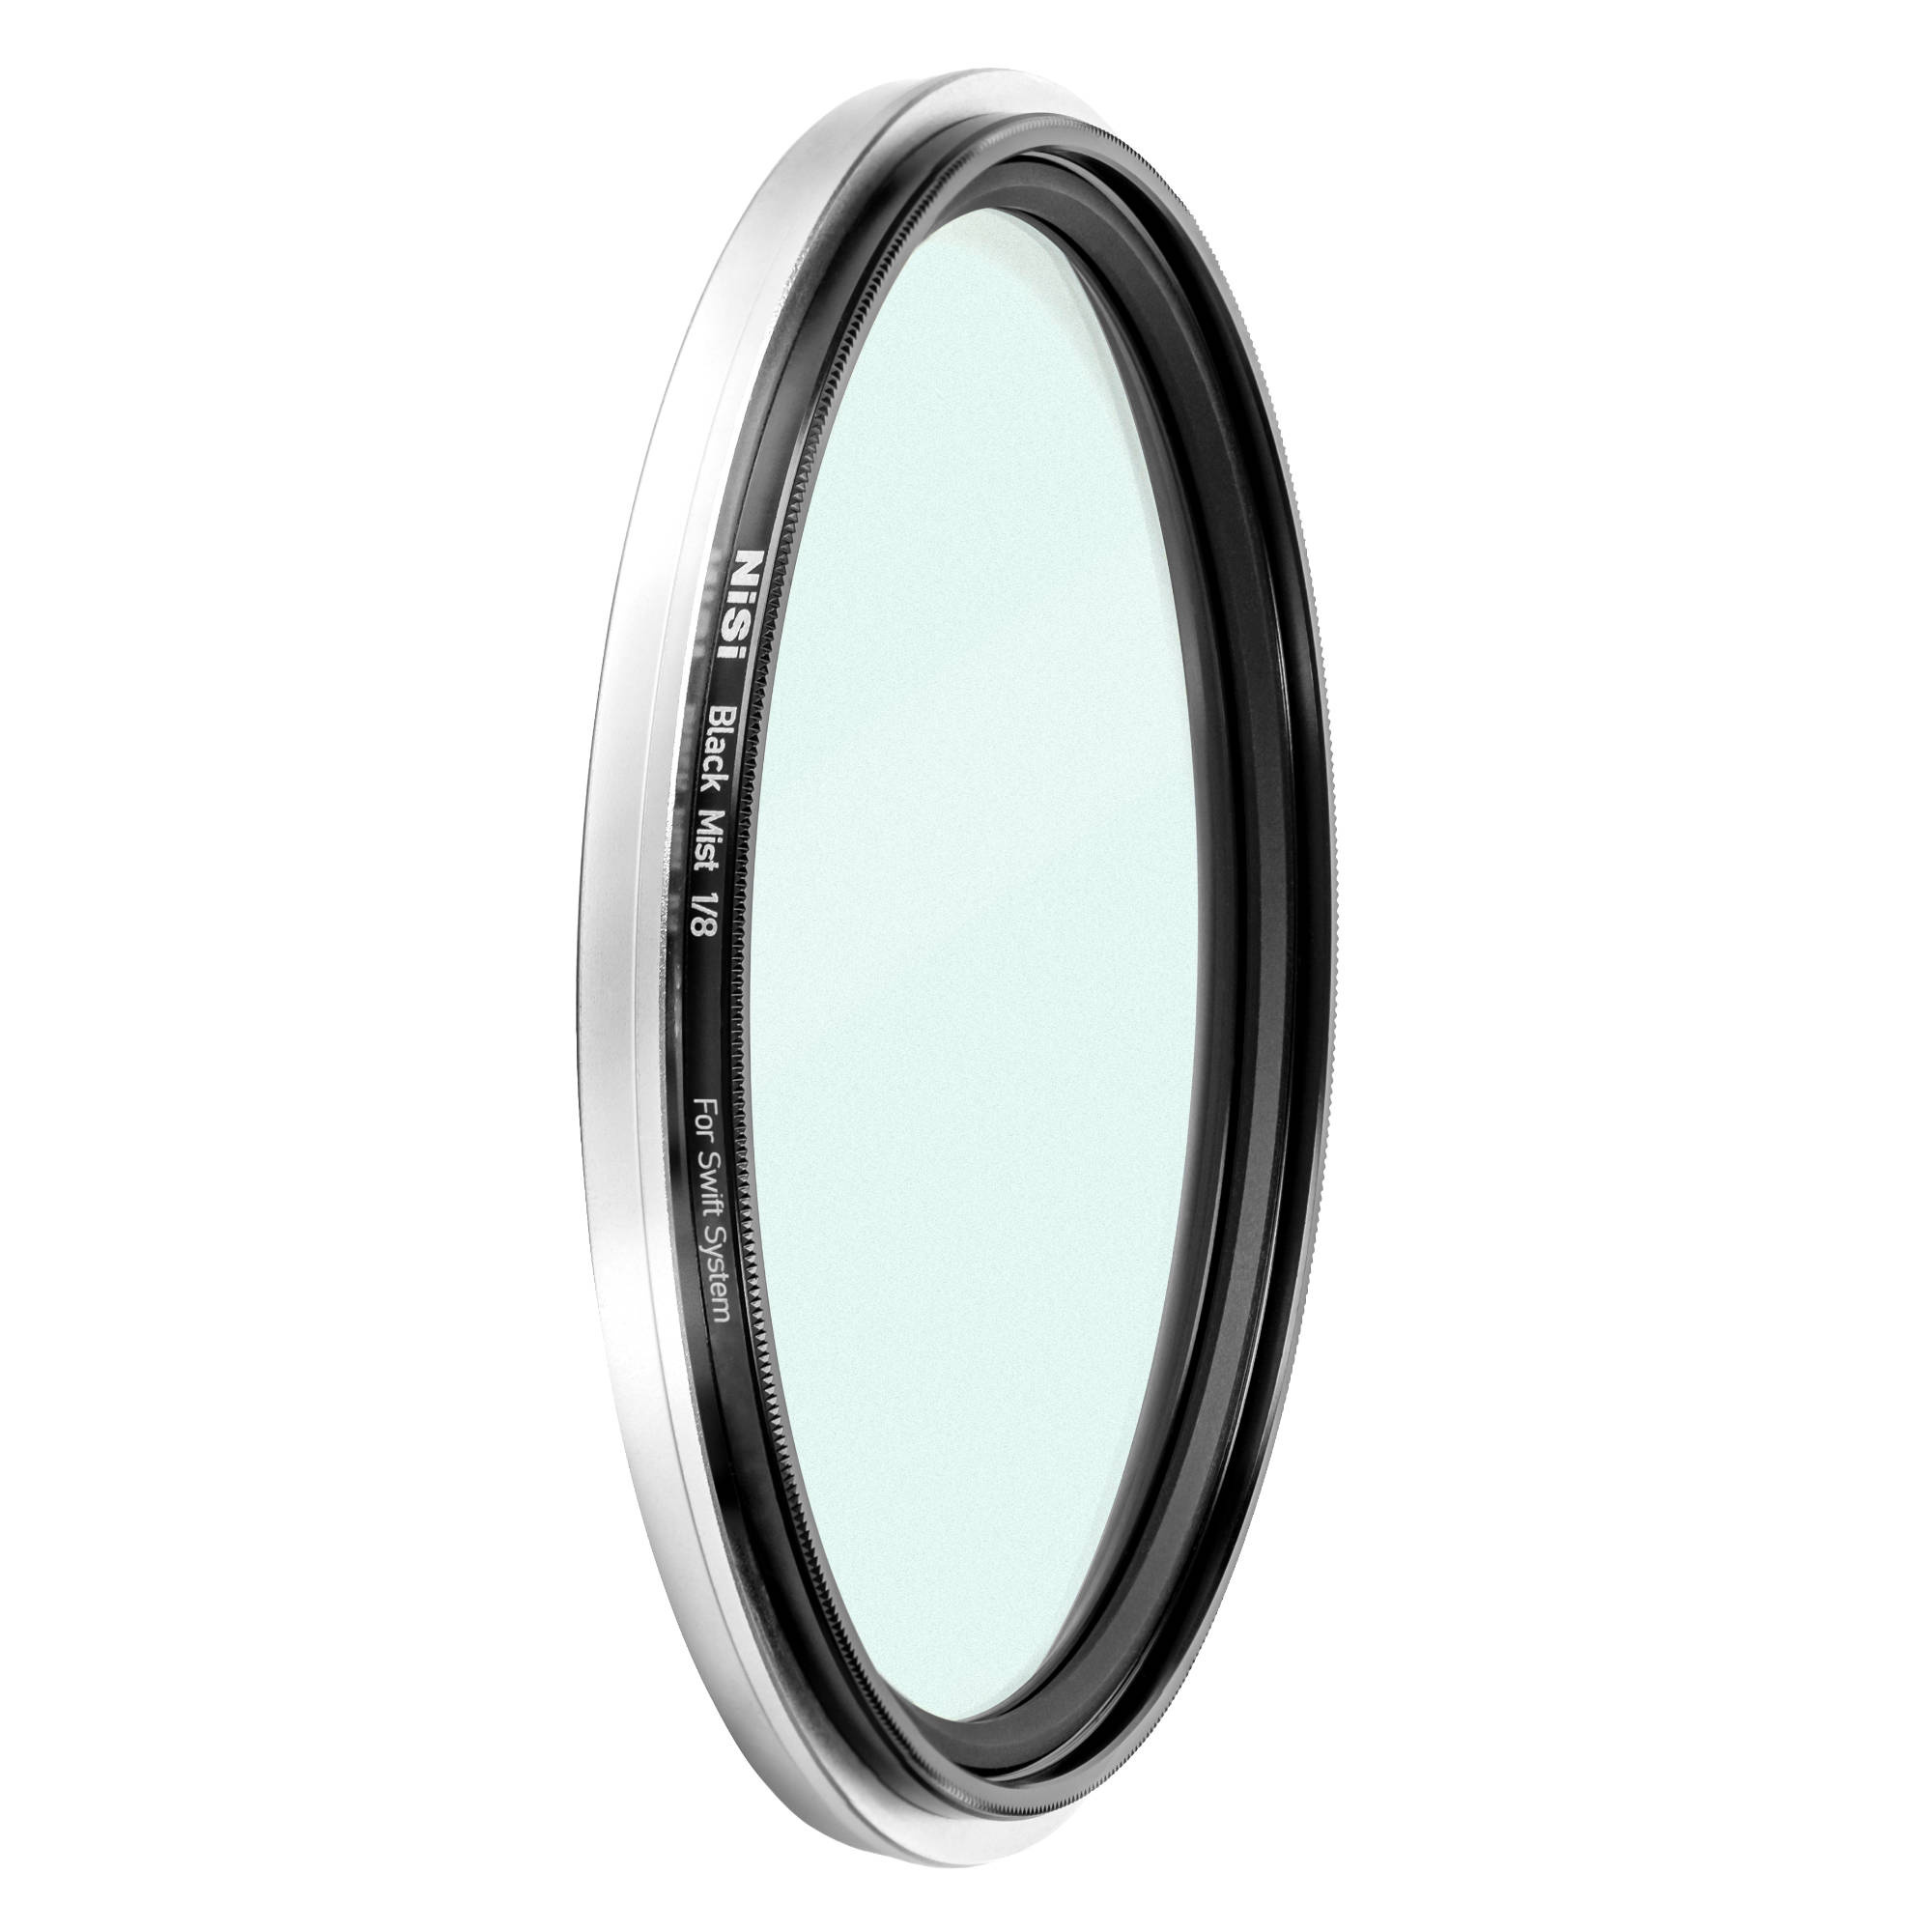 NiSi Black Mist 1/8 Filter for 67mm True Colour VND and Swift System